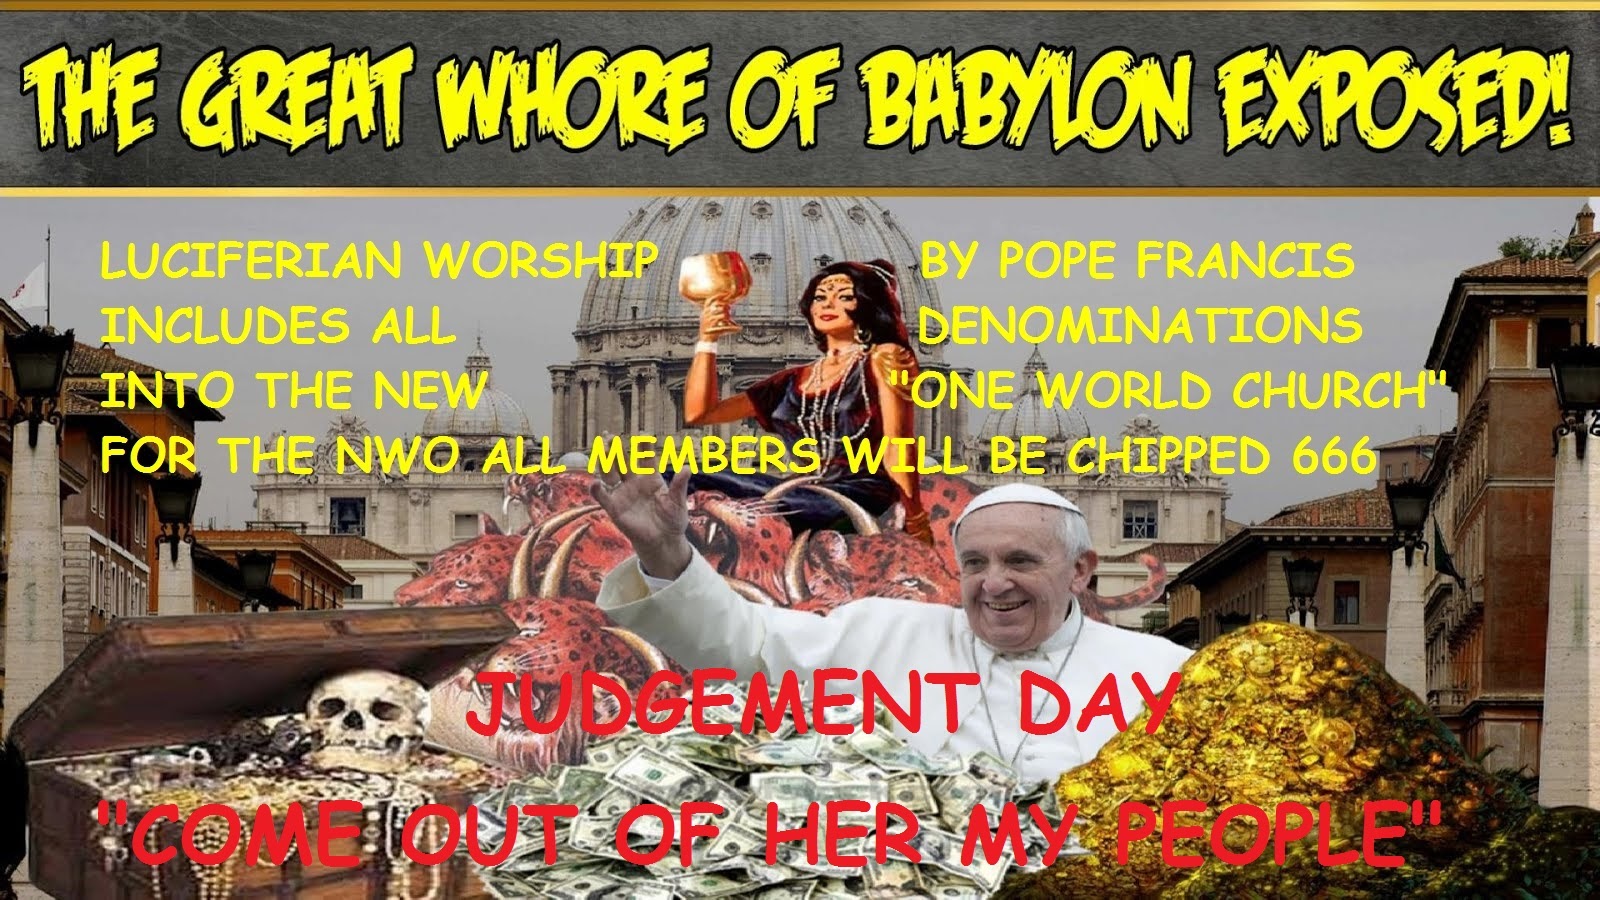 THE GREAT WHORE OF BABYLON EXPOSED! - GOD DESTROYS THE CHURCH UNDER HIS JUDGEMENT...